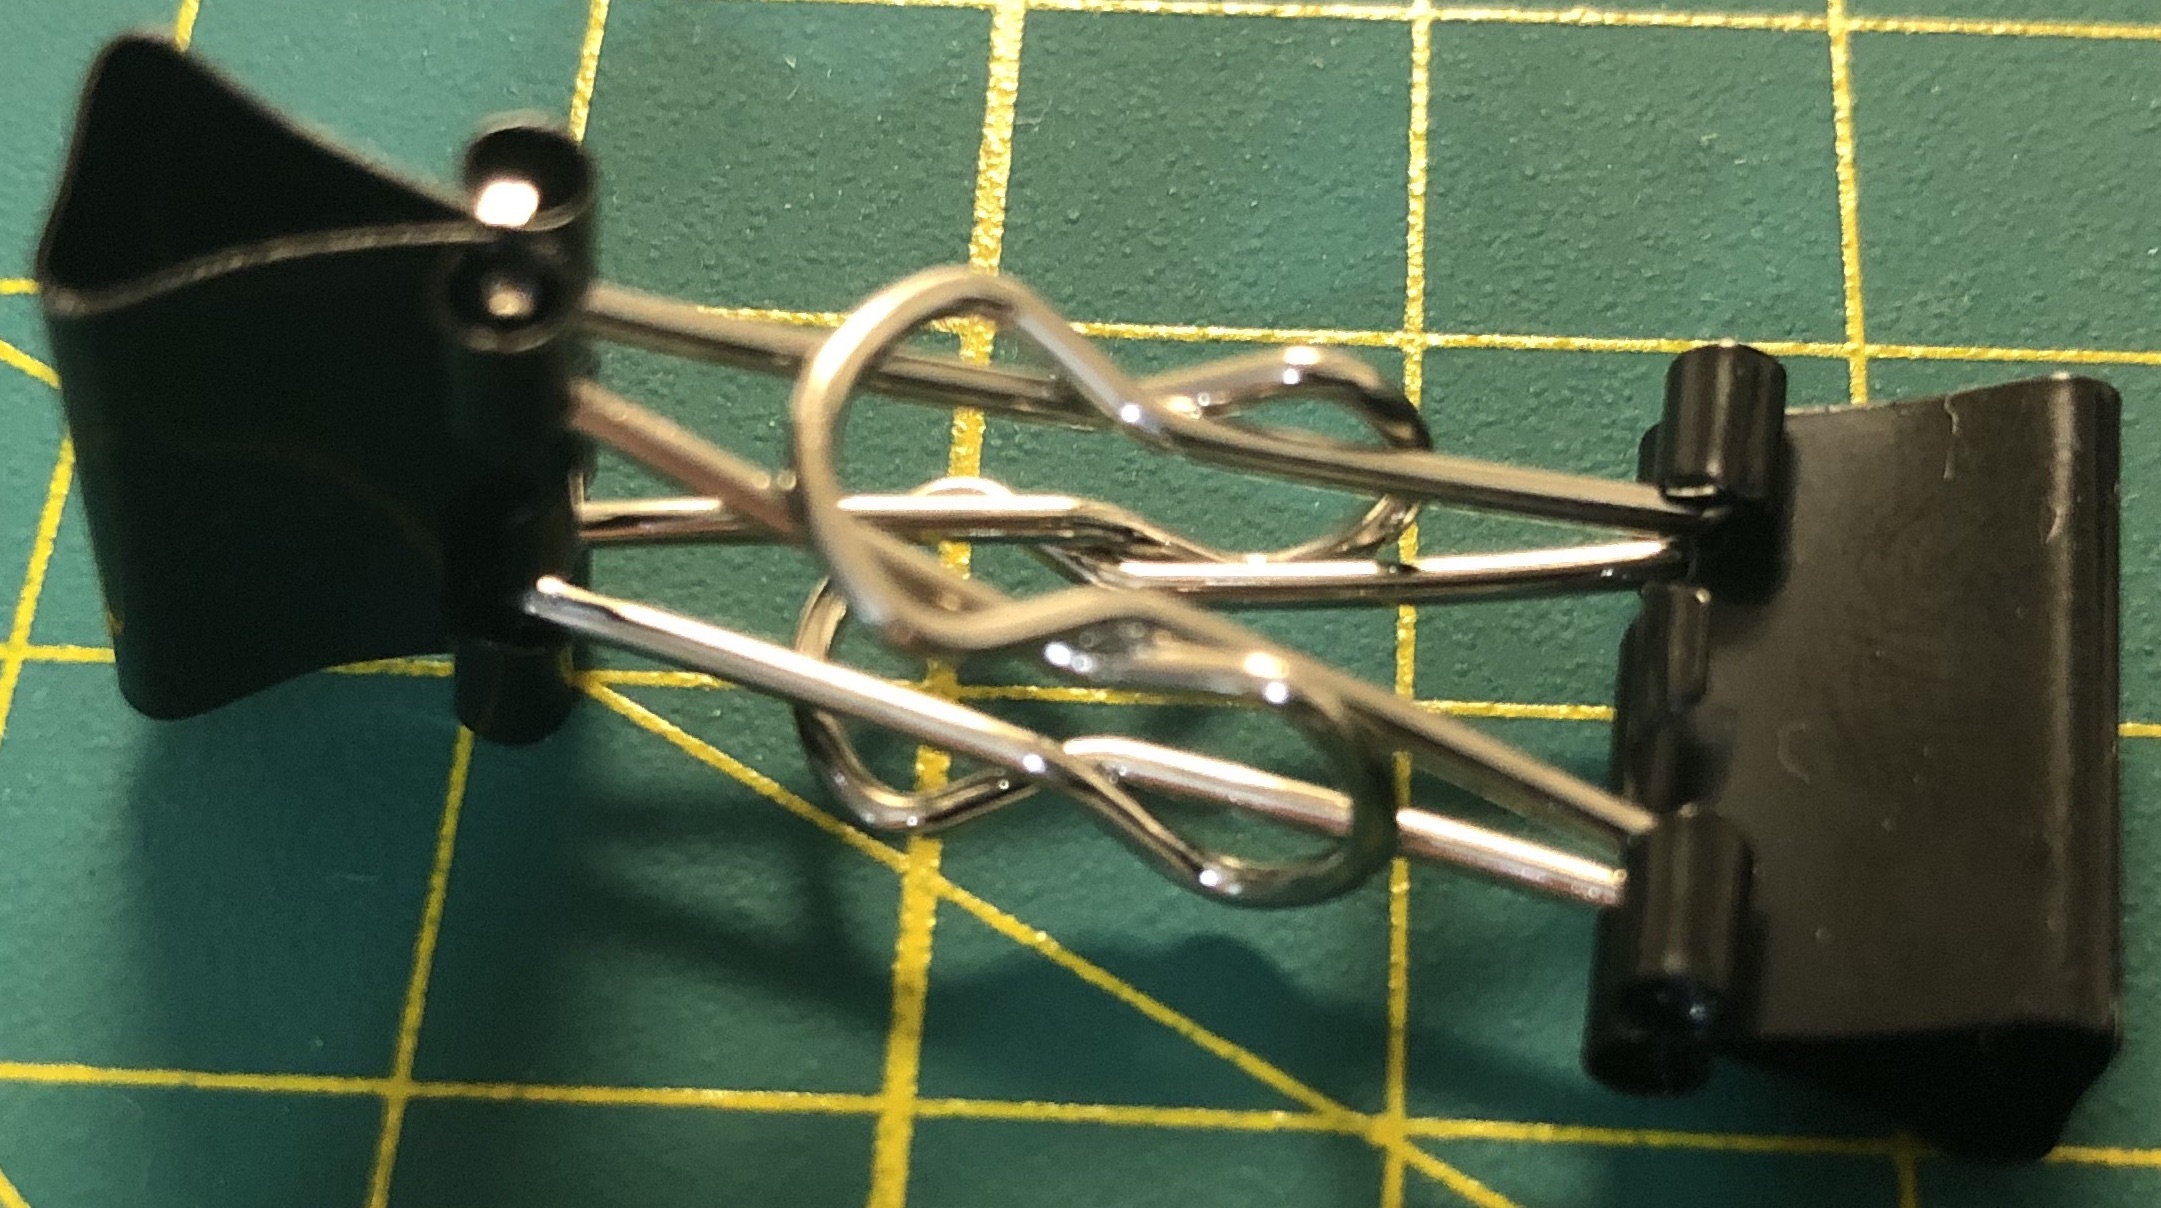 2 binder clips hold hand to hand